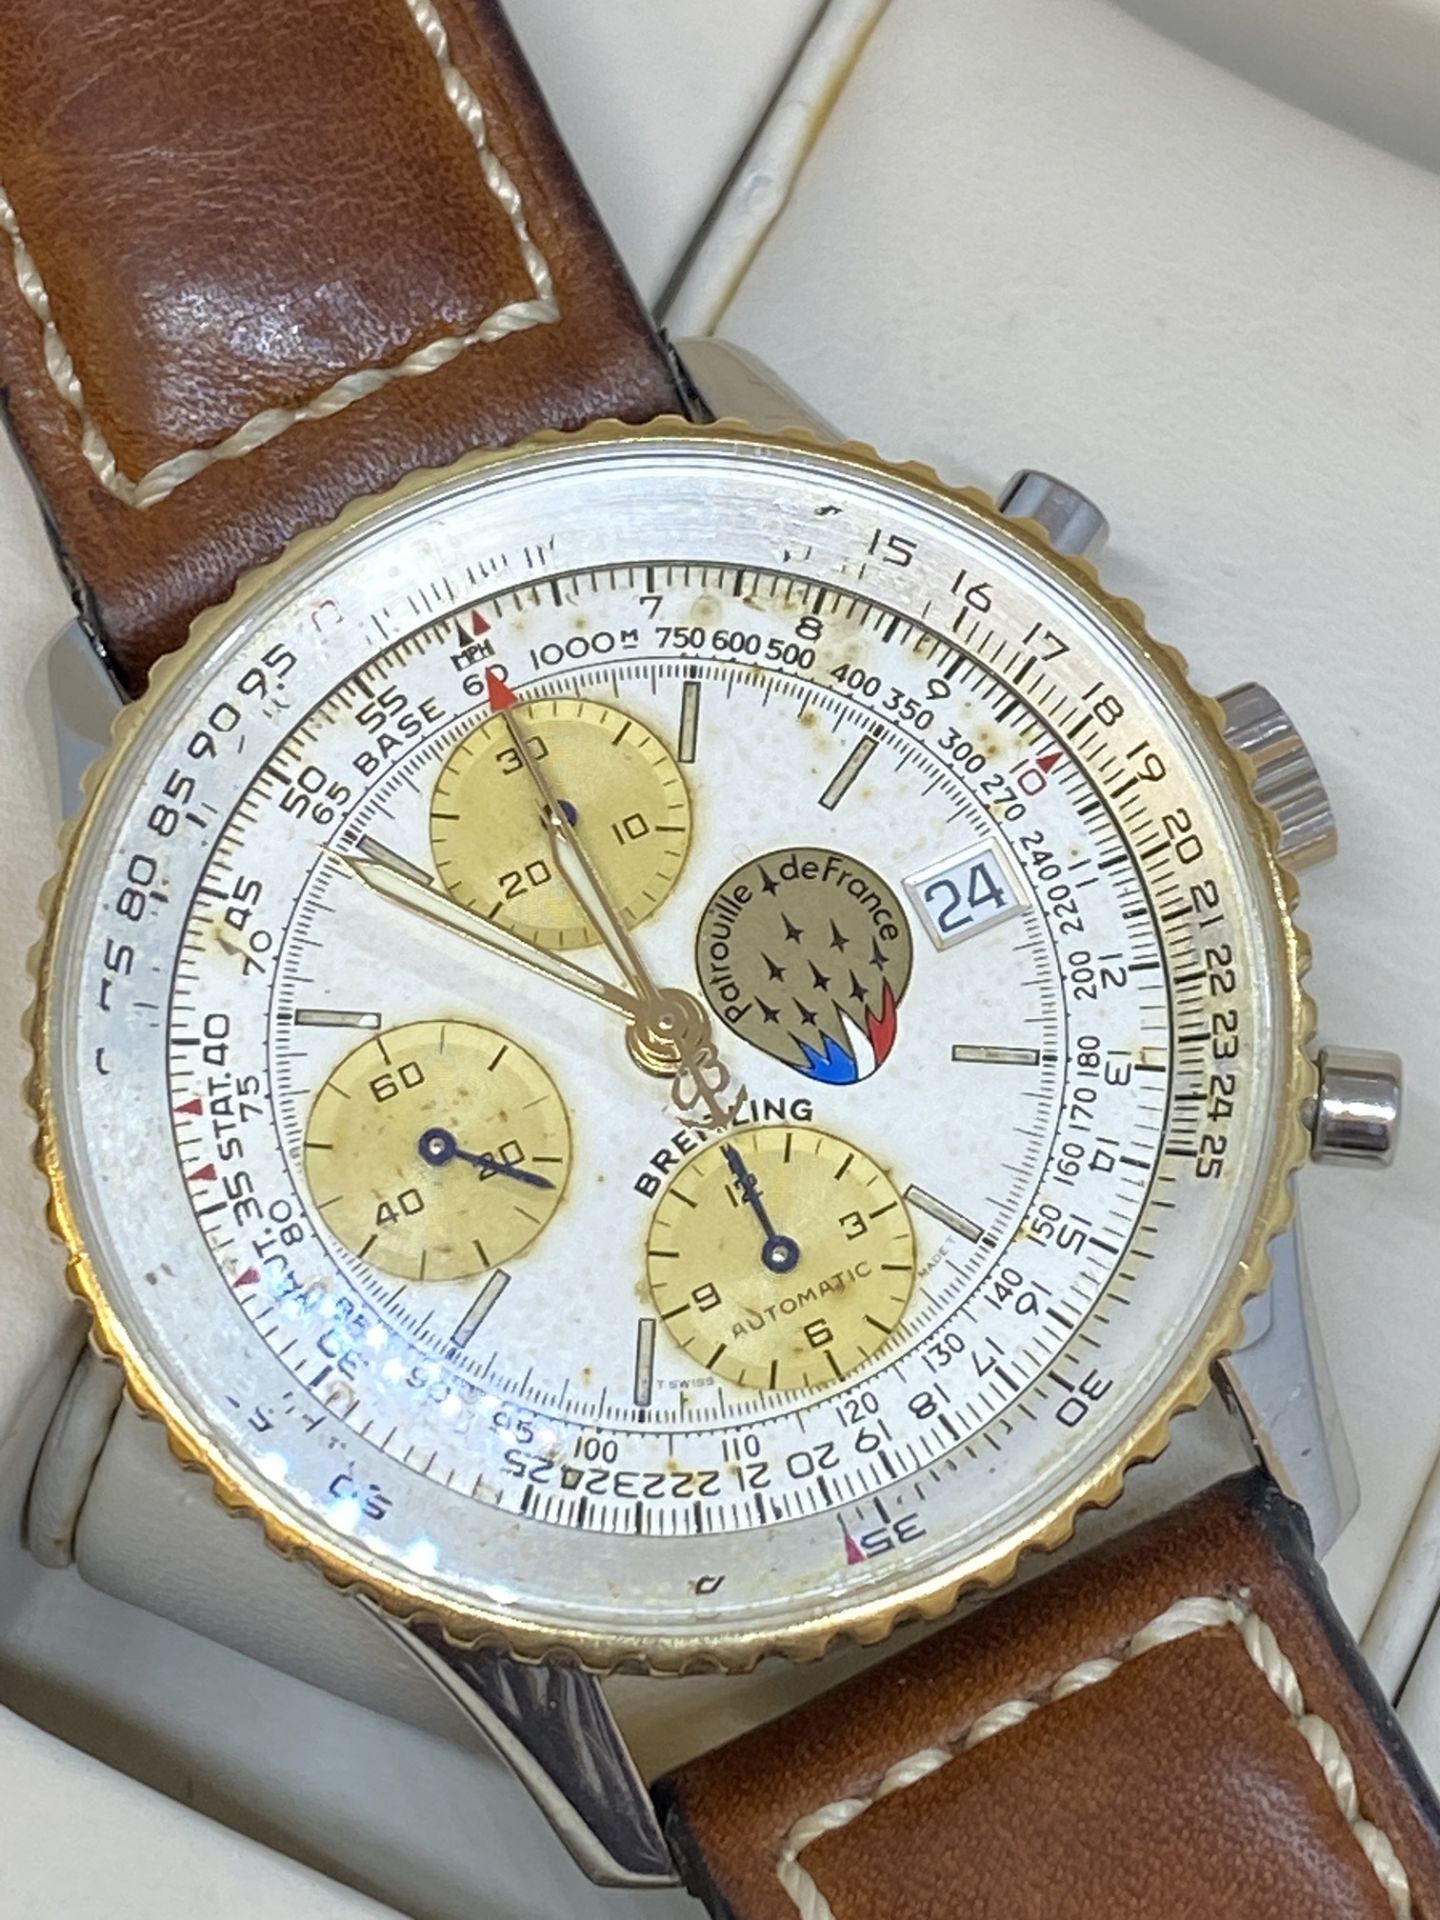 BREITLING CHRONO WATCH GOLD & STEEL NAVITIMER WATCH - Image 3 of 11